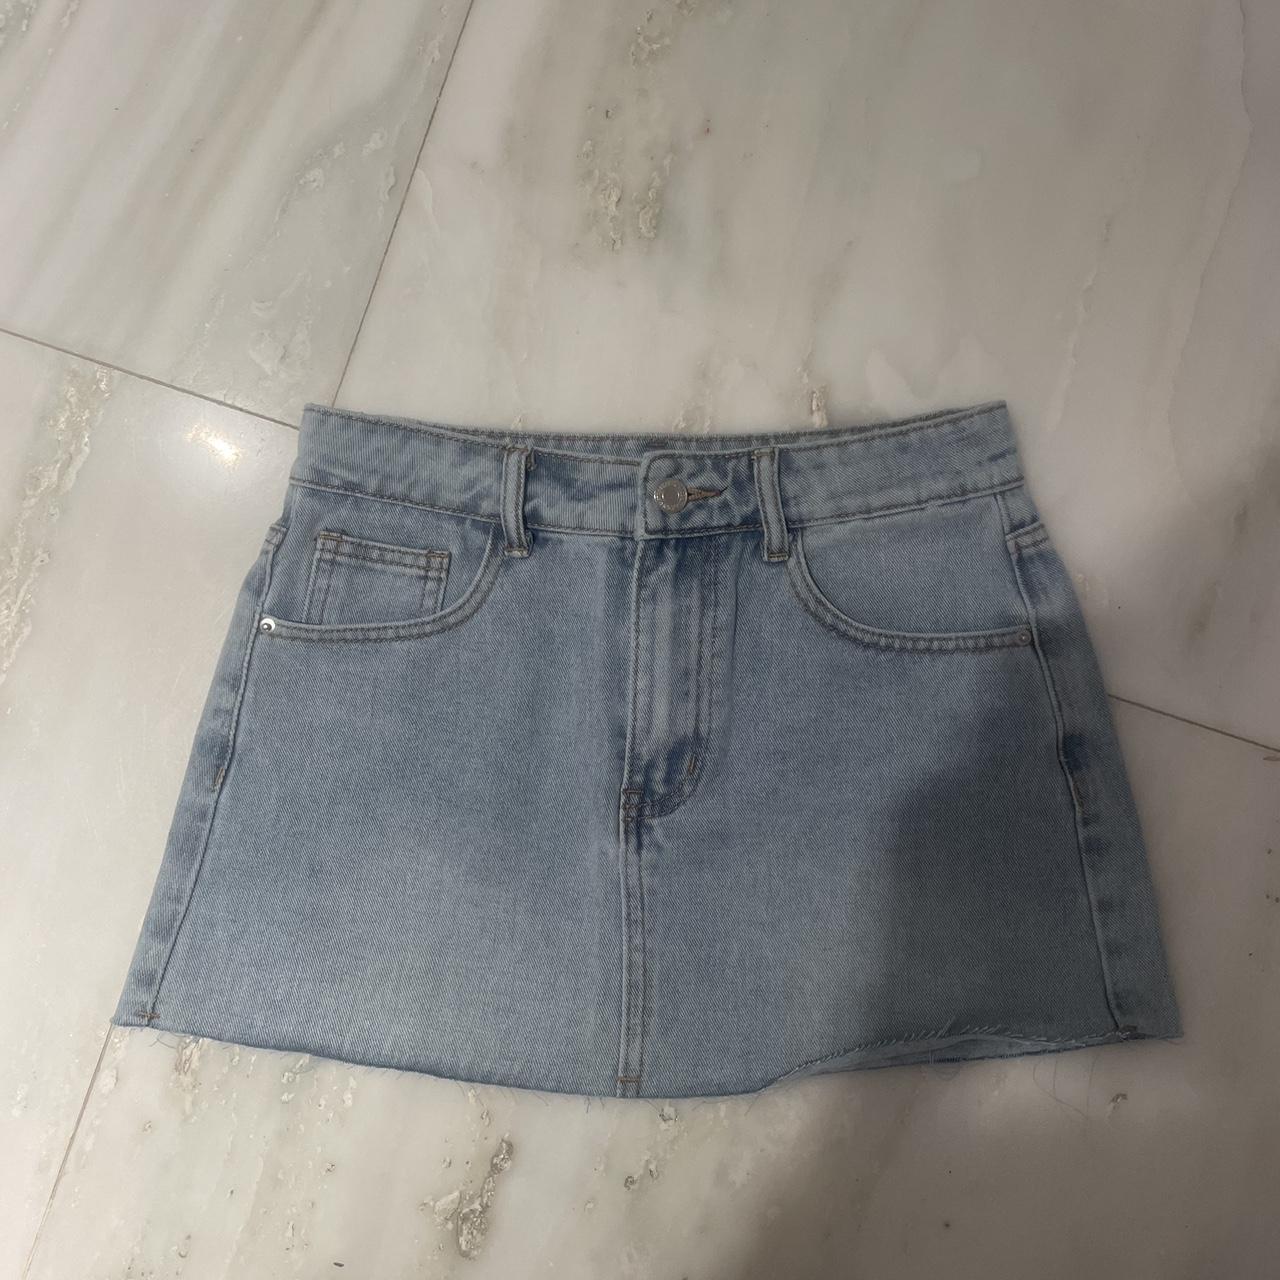 jean mini skirt message for details bought from... - Depop